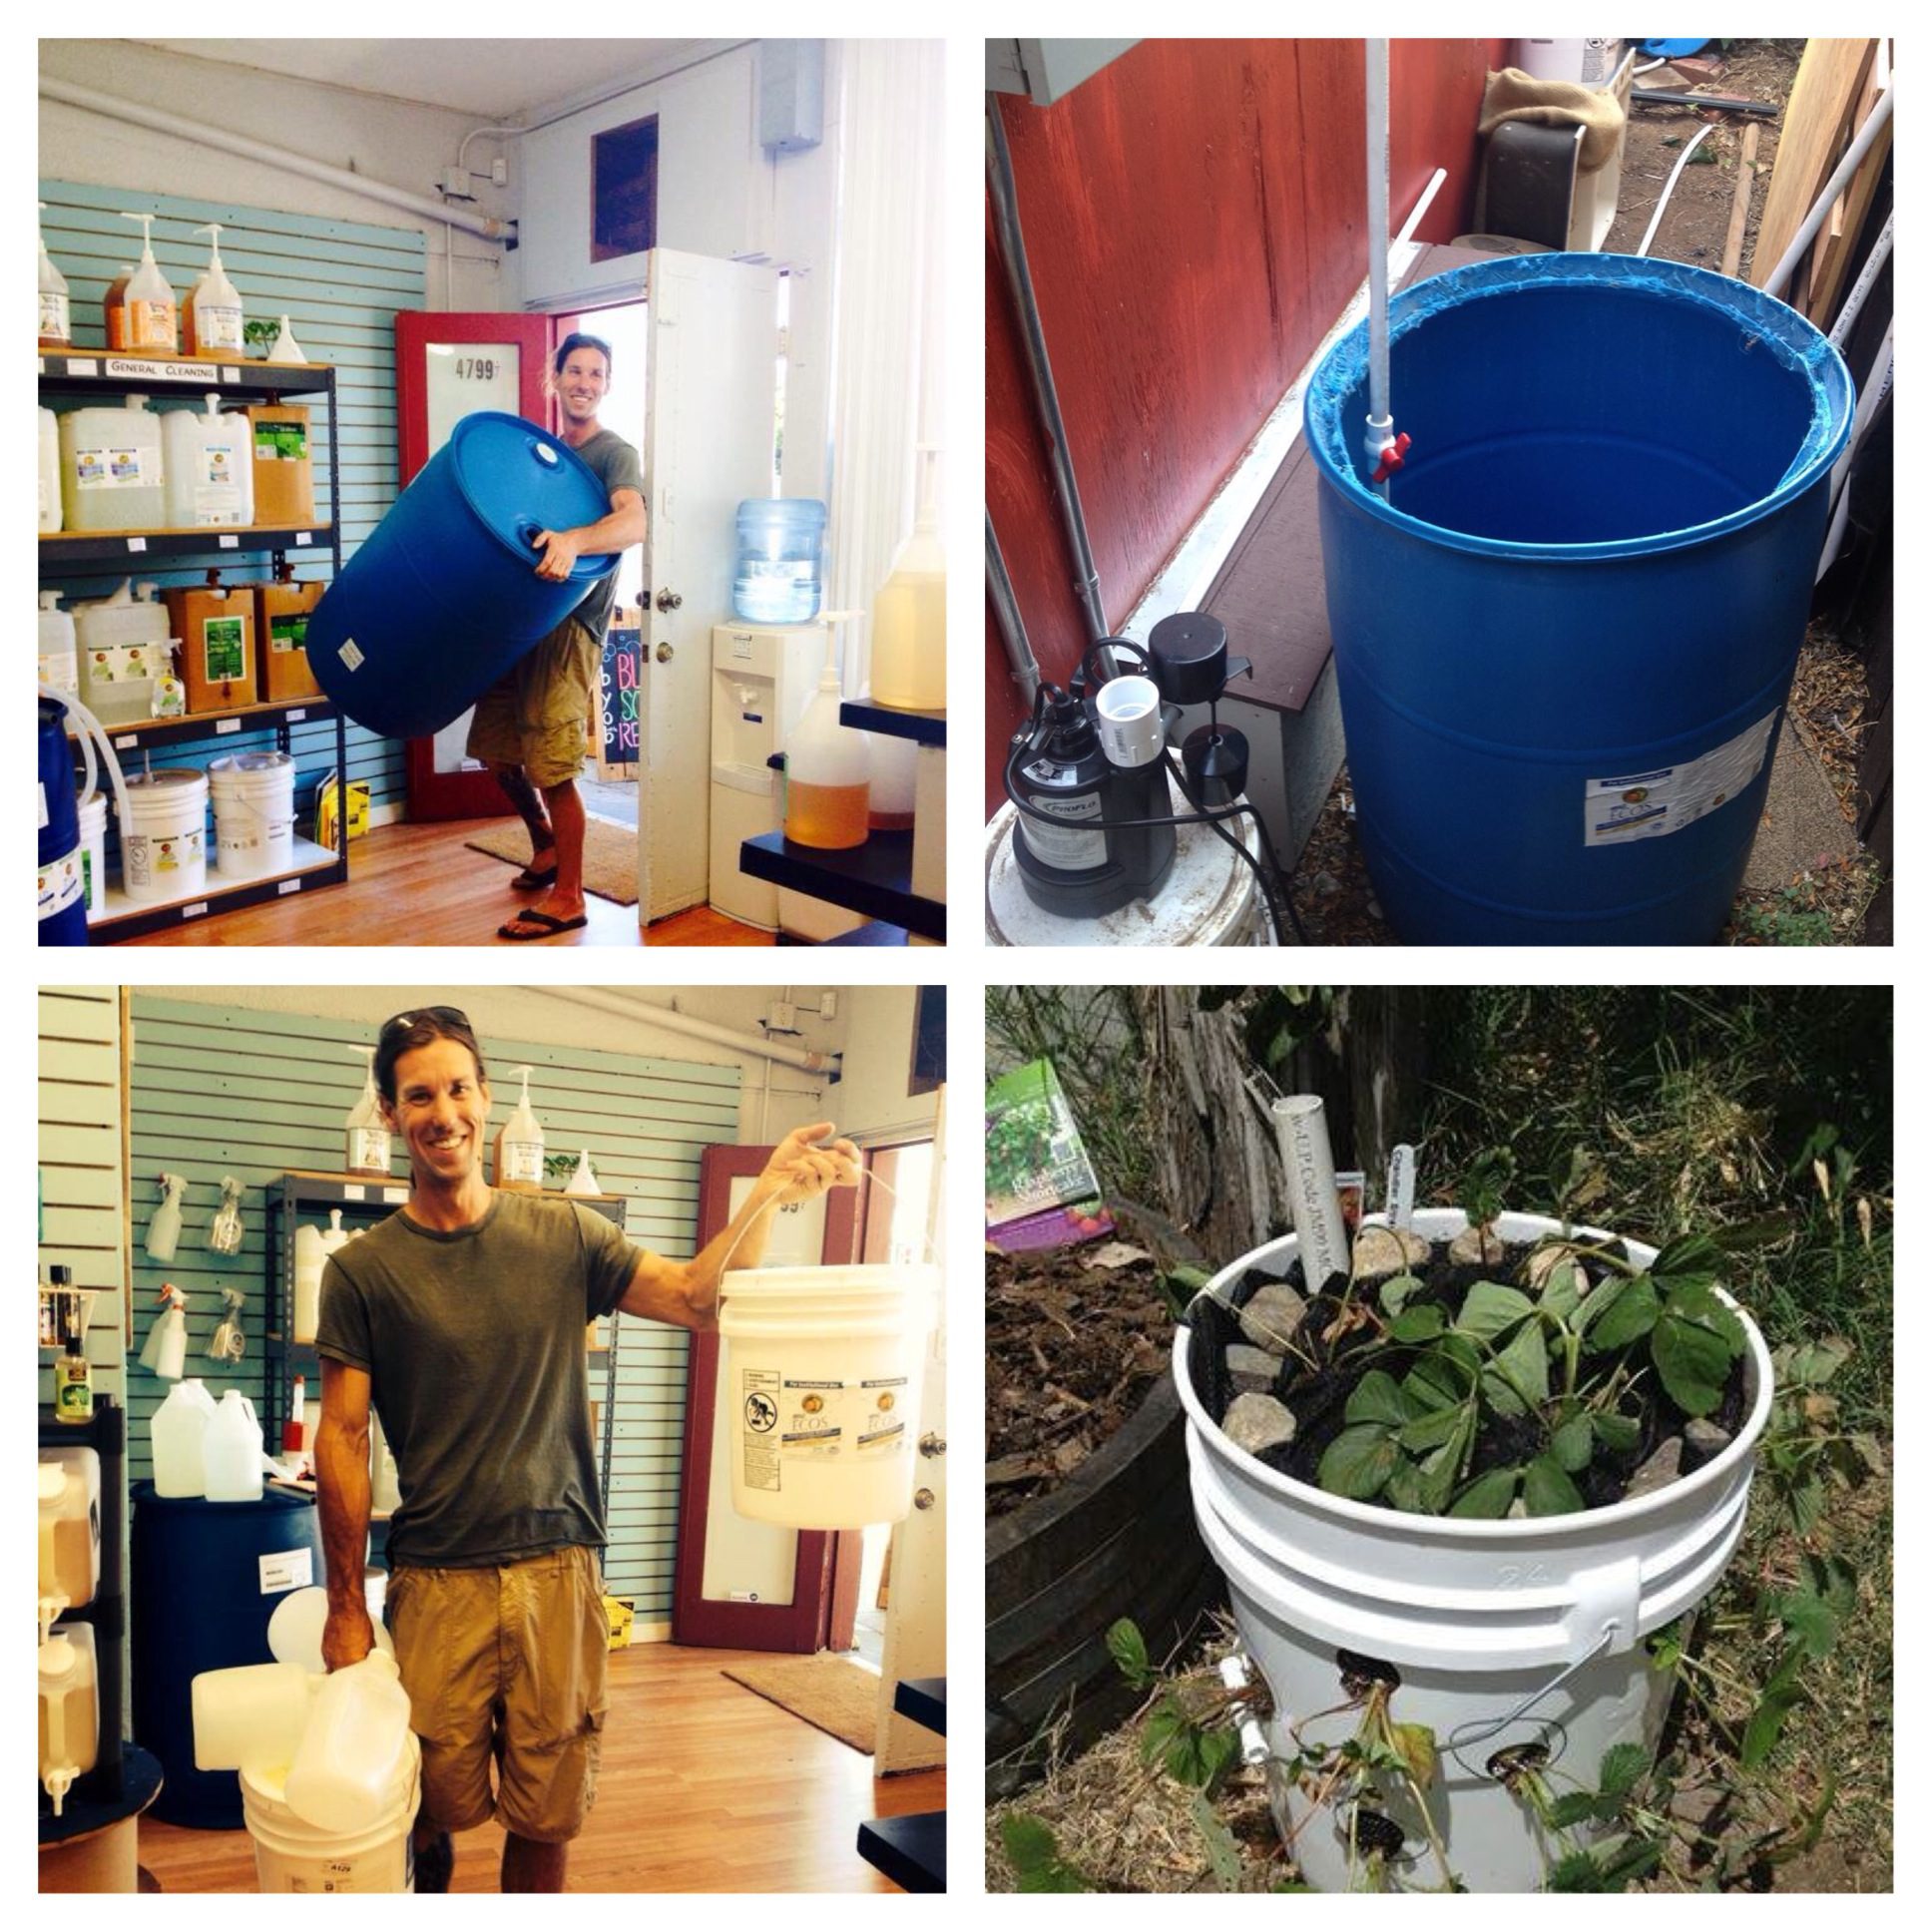 Blue Dot Refill is serious about reuse.  You can read more and get reuse ideas on our blog!